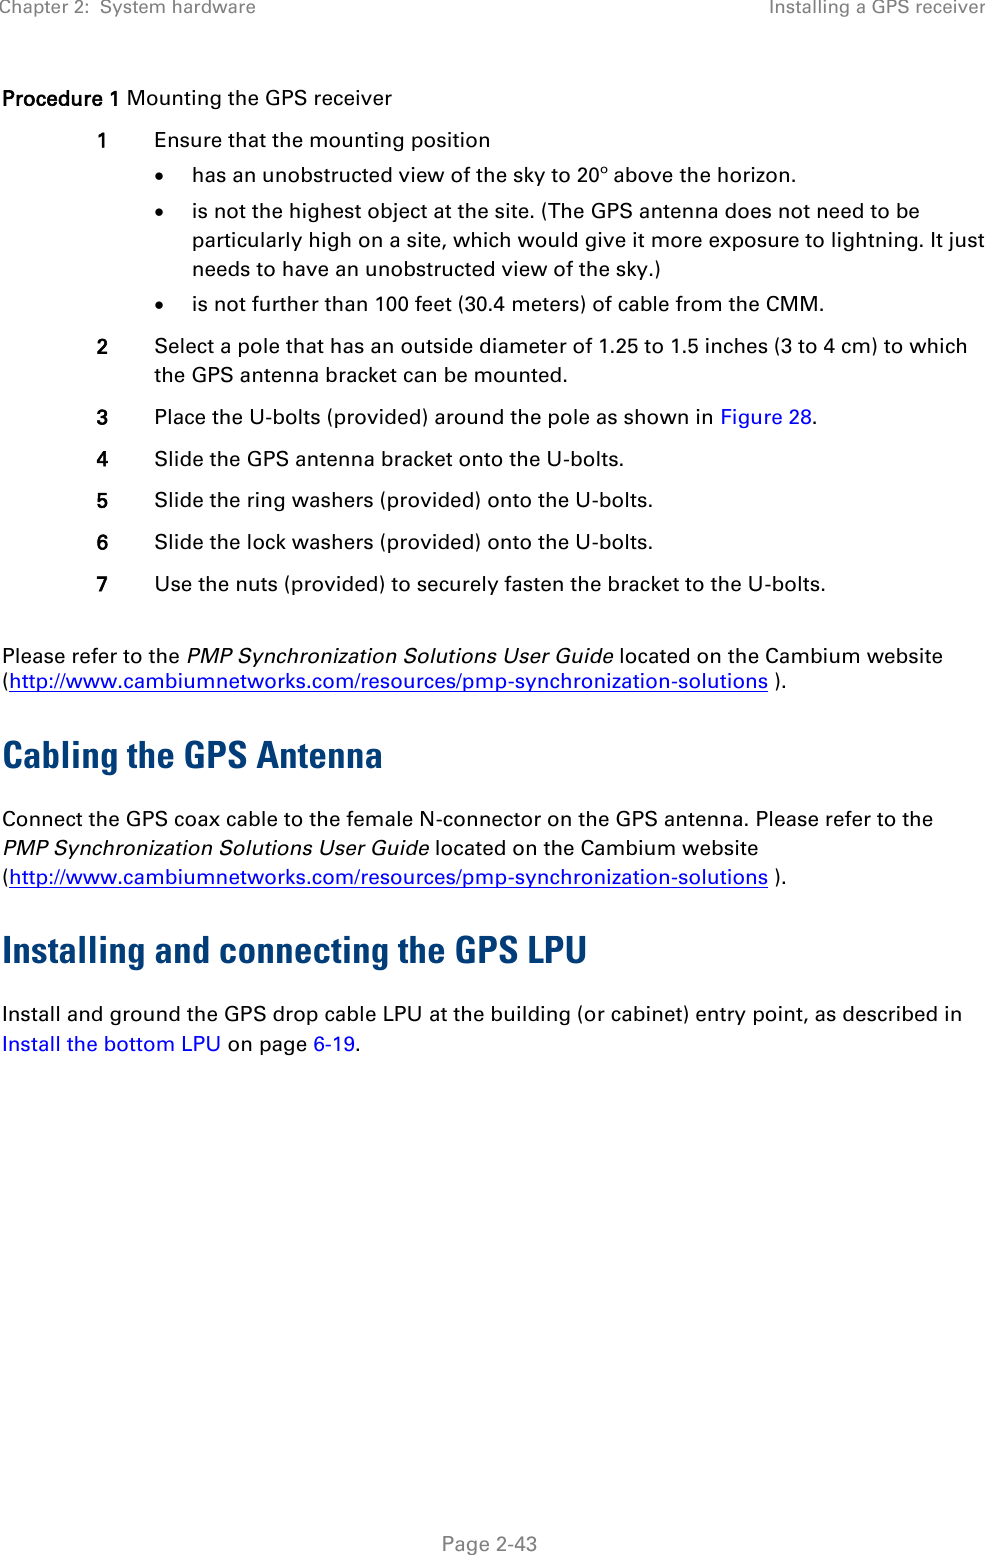 Chapter 2:  System hardware Installing a GPS receiver   Page 2-43 Procedure 1 Mounting the GPS receiver 1 Ensure that the mounting position  has an unobstructed view of the sky to 20º above the horizon.  is not the highest object at the site. (The GPS antenna does not need to be particularly high on a site, which would give it more exposure to lightning. It just needs to have an unobstructed view of the sky.)  is not further than 100 feet (30.4 meters) of cable from the CMM. 2 Select a pole that has an outside diameter of 1.25 to 1.5 inches (3 to 4 cm) to which the GPS antenna bracket can be mounted. 3 Place the U-bolts (provided) around the pole as shown in Figure 28. 4 Slide the GPS antenna bracket onto the U-bolts. 5 Slide the ring washers (provided) onto the U-bolts. 6 Slide the lock washers (provided) onto the U-bolts. 7 Use the nuts (provided) to securely fasten the bracket to the U-bolts.  Please refer to the PMP Synchronization Solutions User Guide located on the Cambium website (http://www.cambiumnetworks.com/resources/pmp-synchronization-solutions ). Cabling the GPS Antenna Connect the GPS coax cable to the female N-connector on the GPS antenna. Please refer to the PMP Synchronization Solutions User Guide located on the Cambium website (http://www.cambiumnetworks.com/resources/pmp-synchronization-solutions ). Installing and connecting the GPS LPU Install and ground the GPS drop cable LPU at the building (or cabinet) entry point, as described in Install the bottom LPU on page 6-19.  